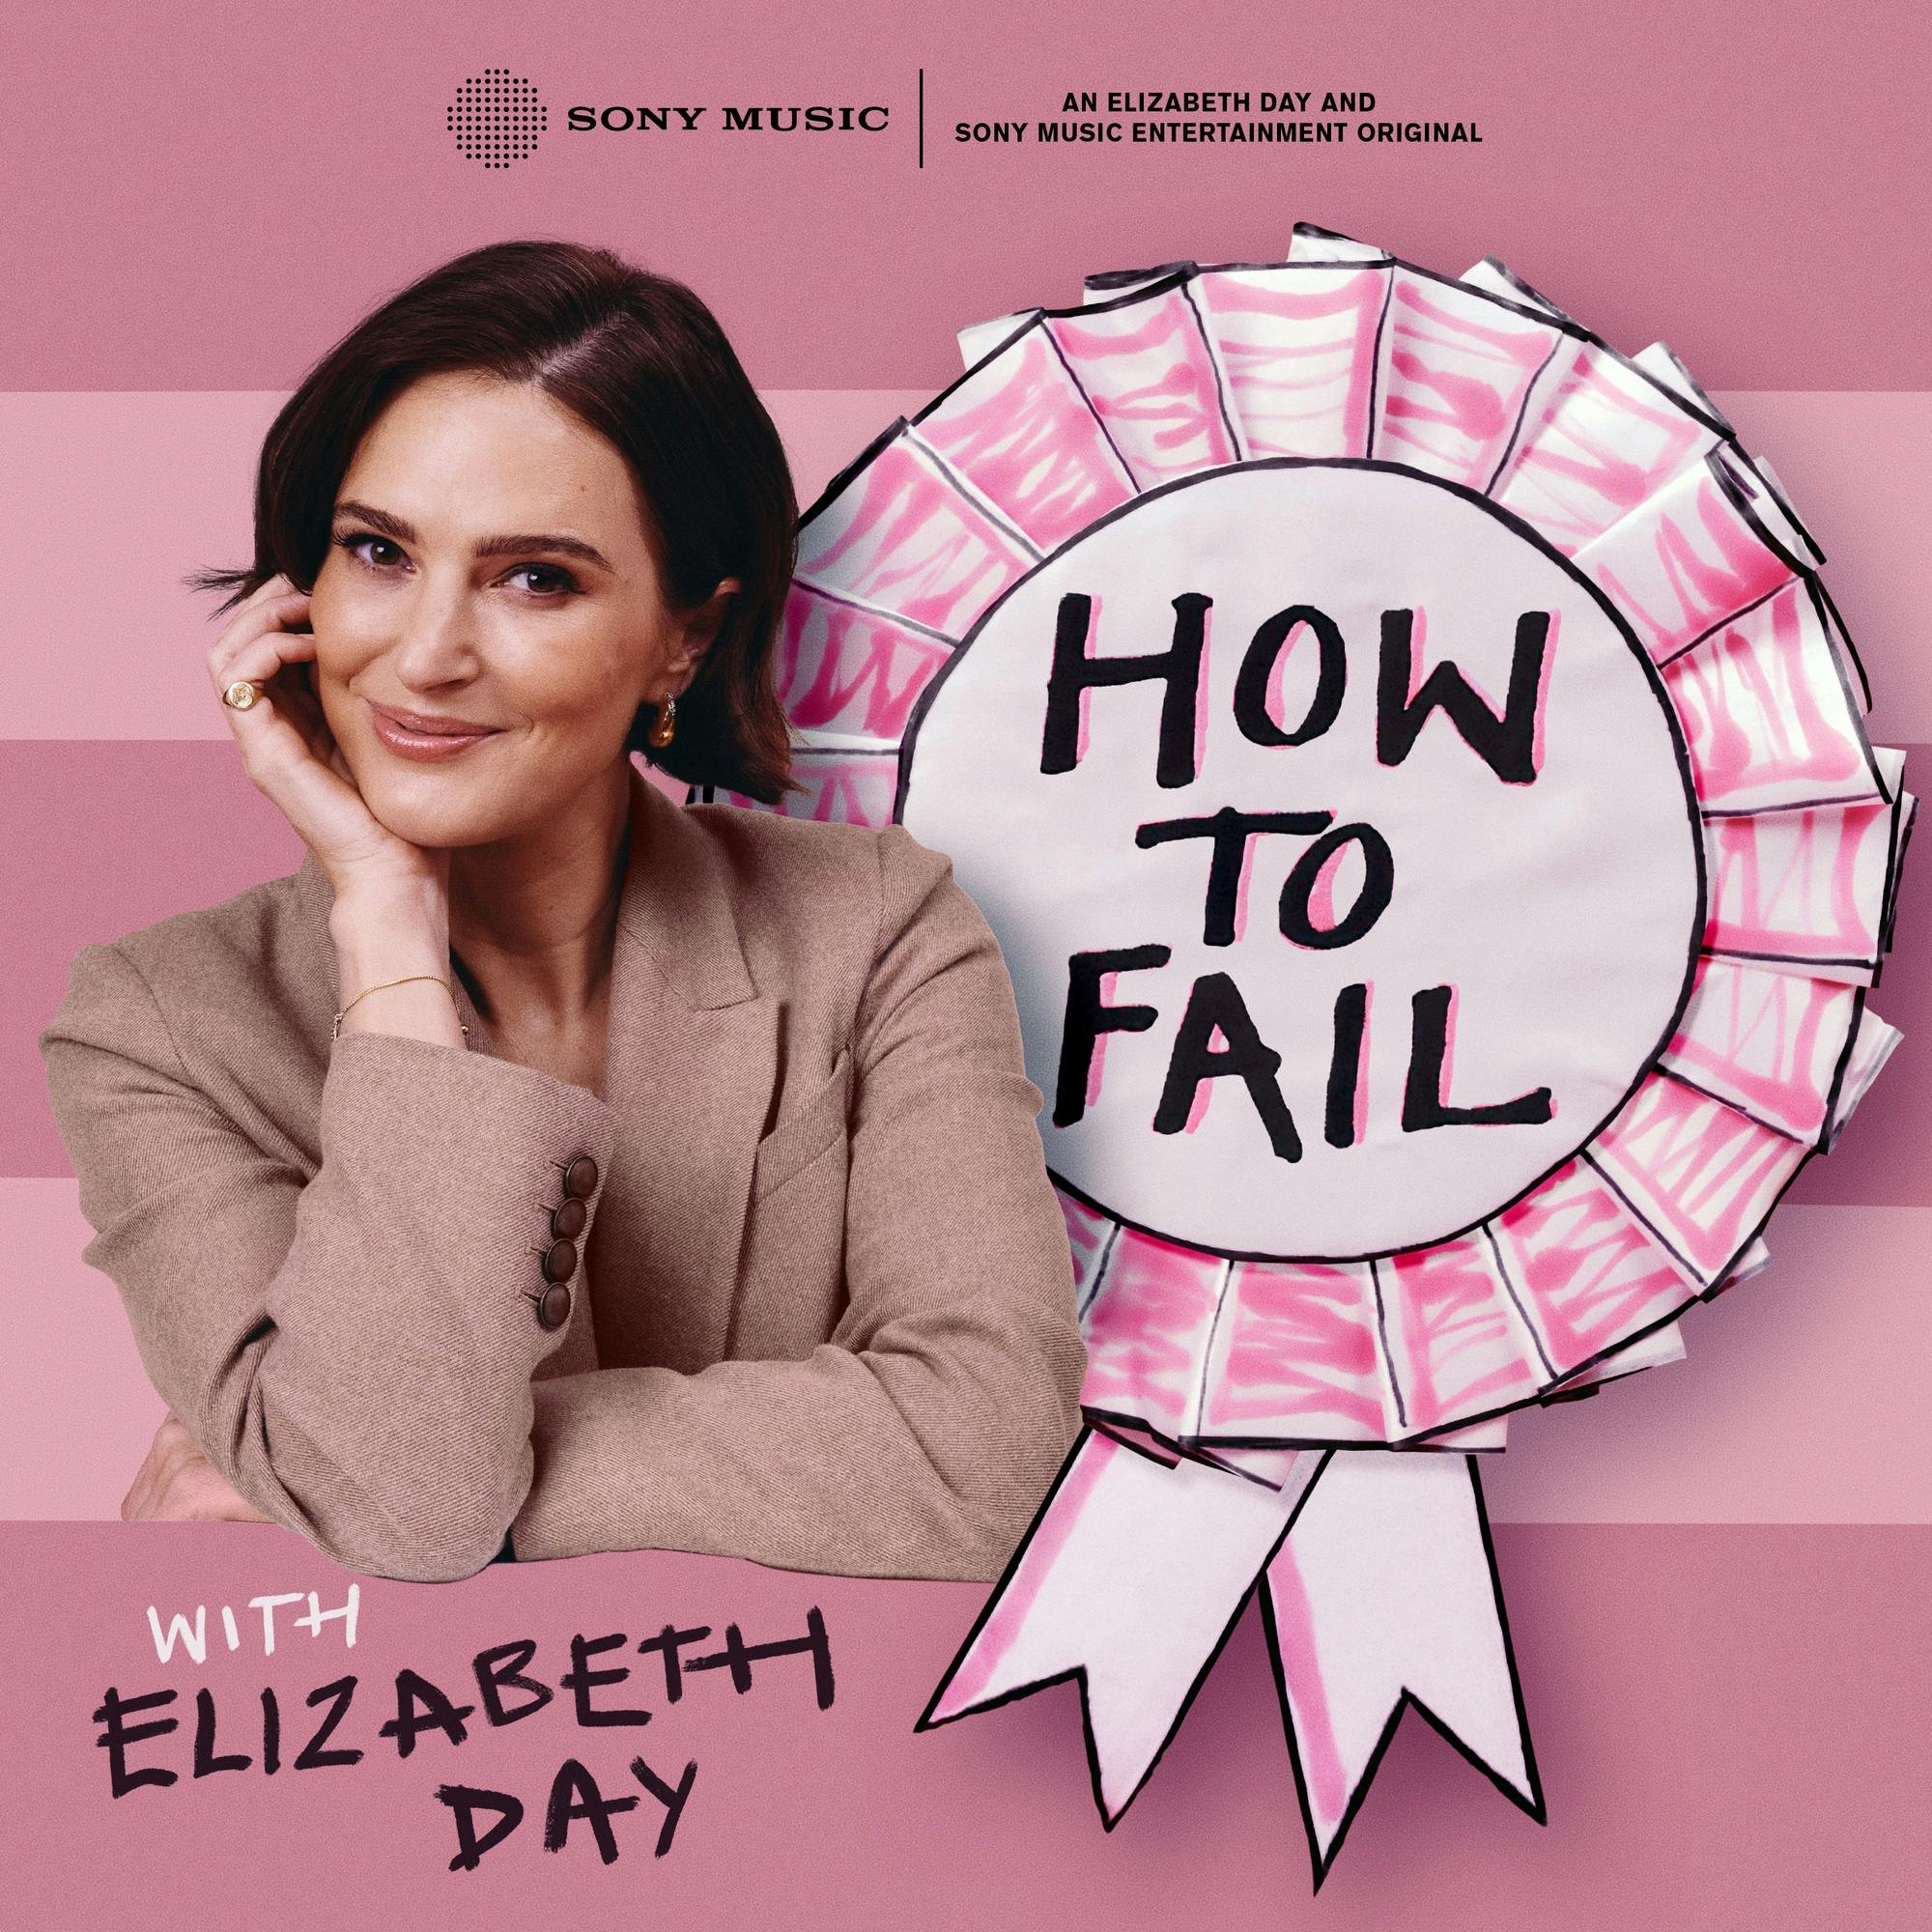 Claudia Winkleman on the joy of imperfection - How to Fail with Elizabeth Day